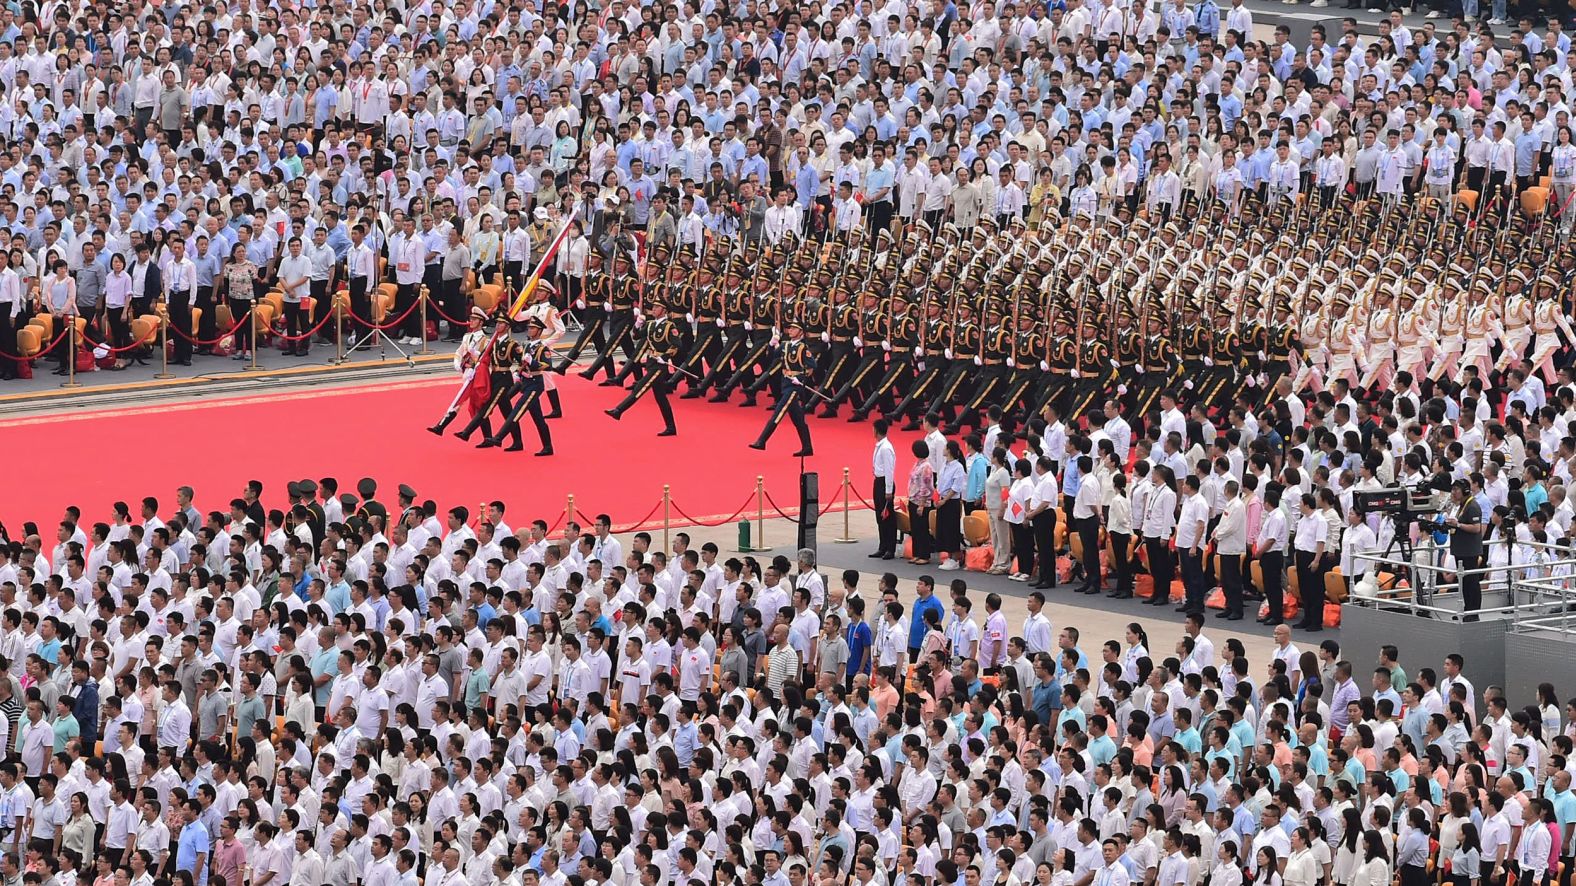 An honor guard marches in Tiananmen Square during a July 2021 celebration marking the 100th anniversary of the Chinese Communist Party.